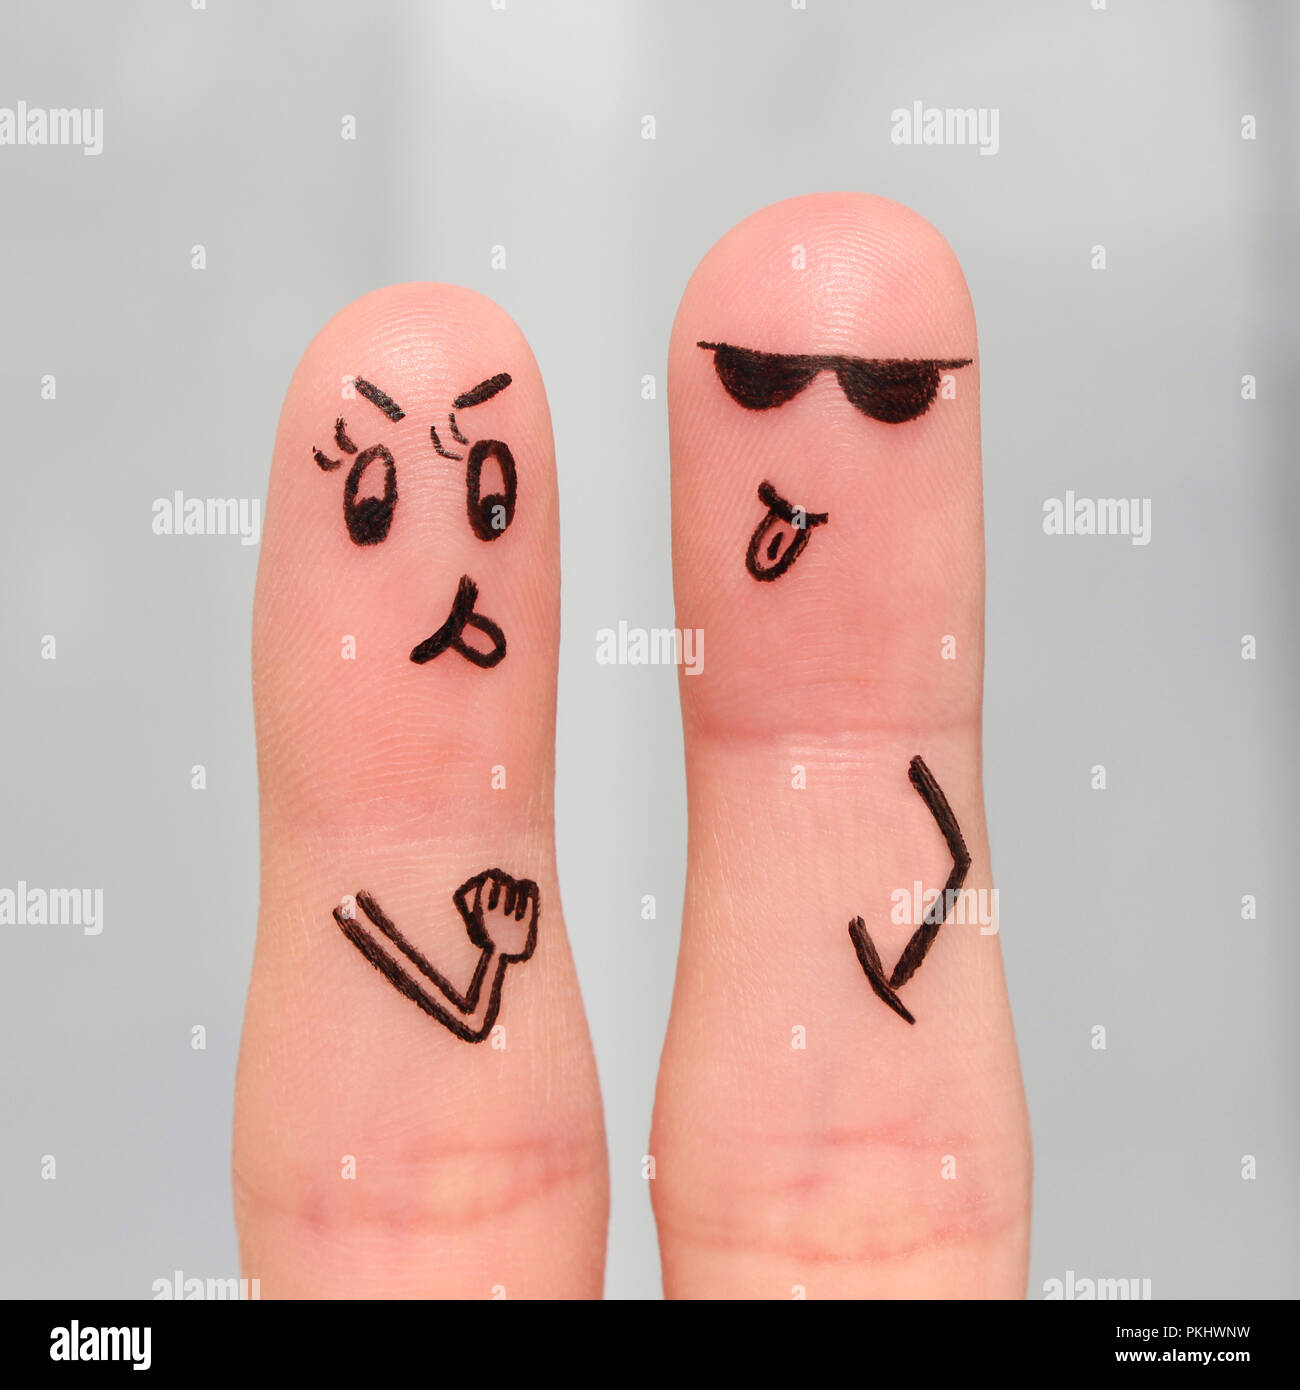 Finger art of couple. Couple of swears, shows the languages to each other. Stock Photo